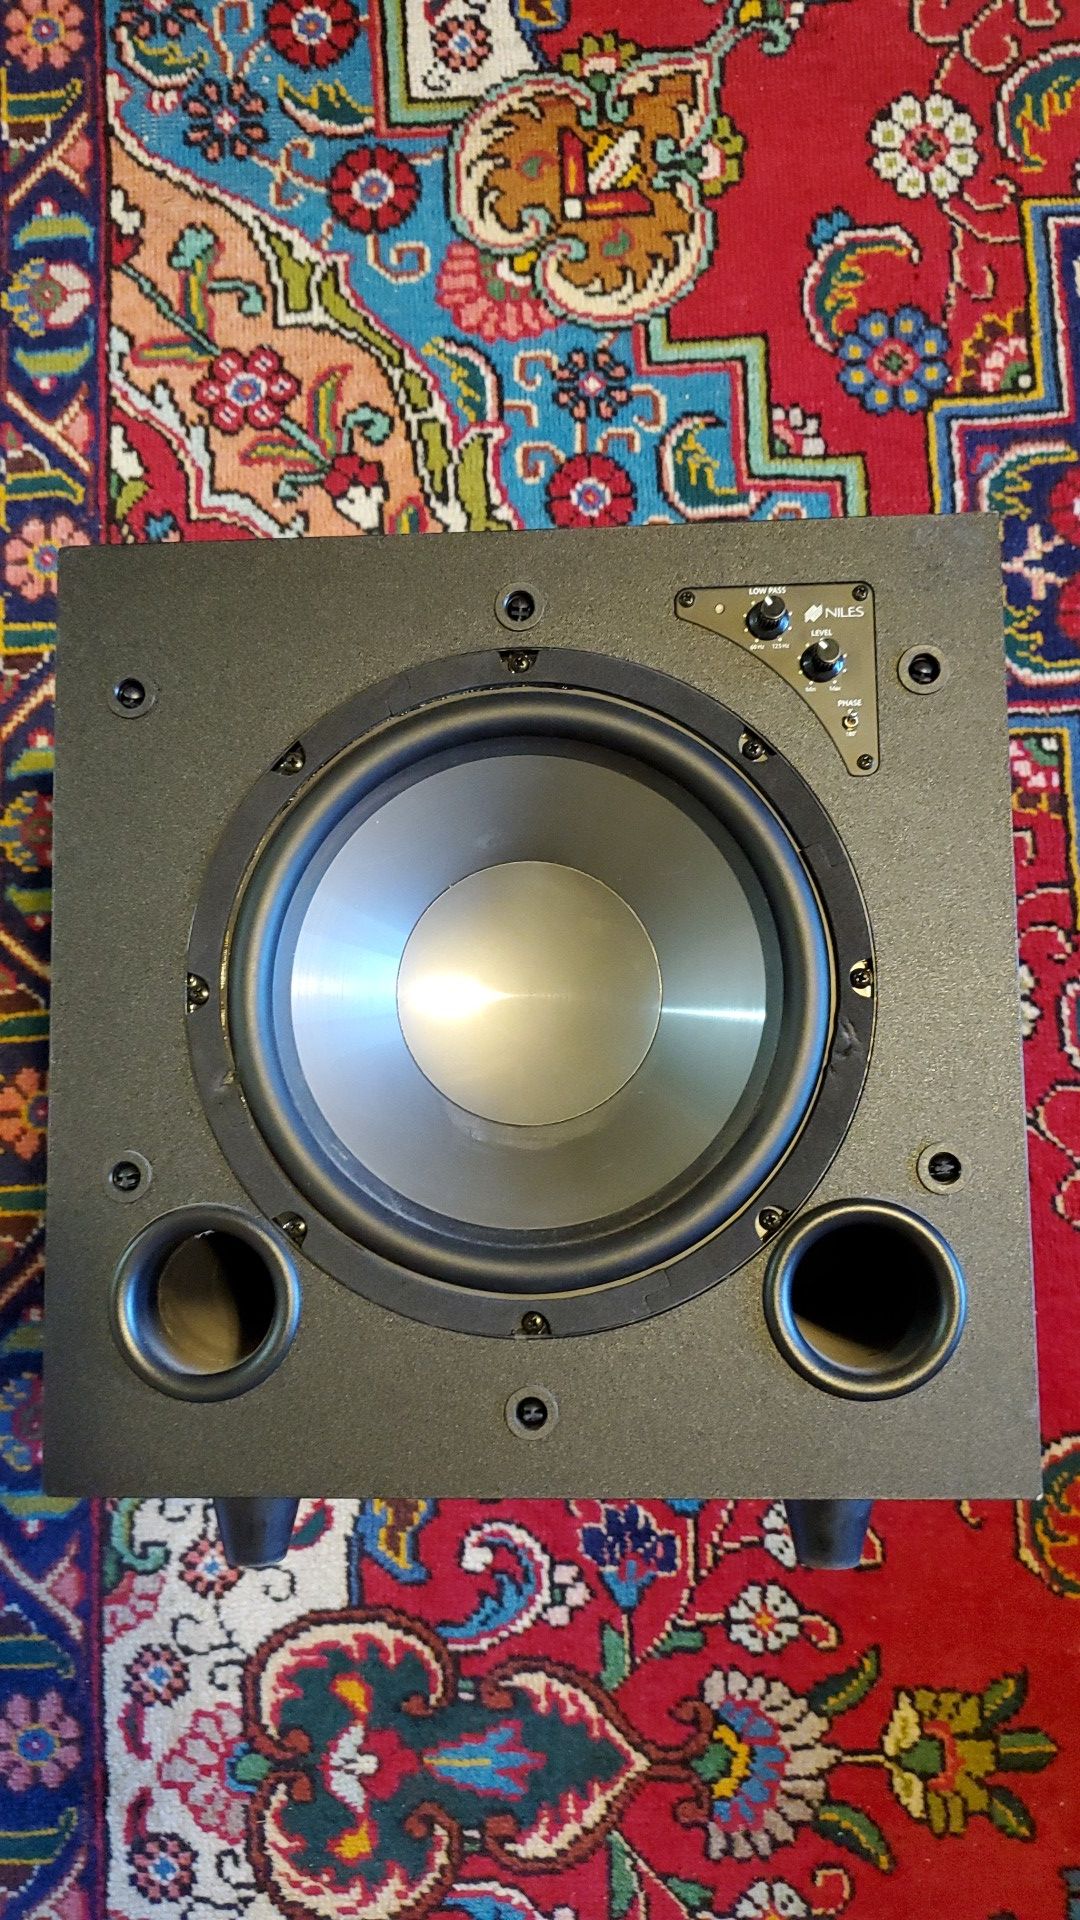 Niles sw10 powered subwoofer